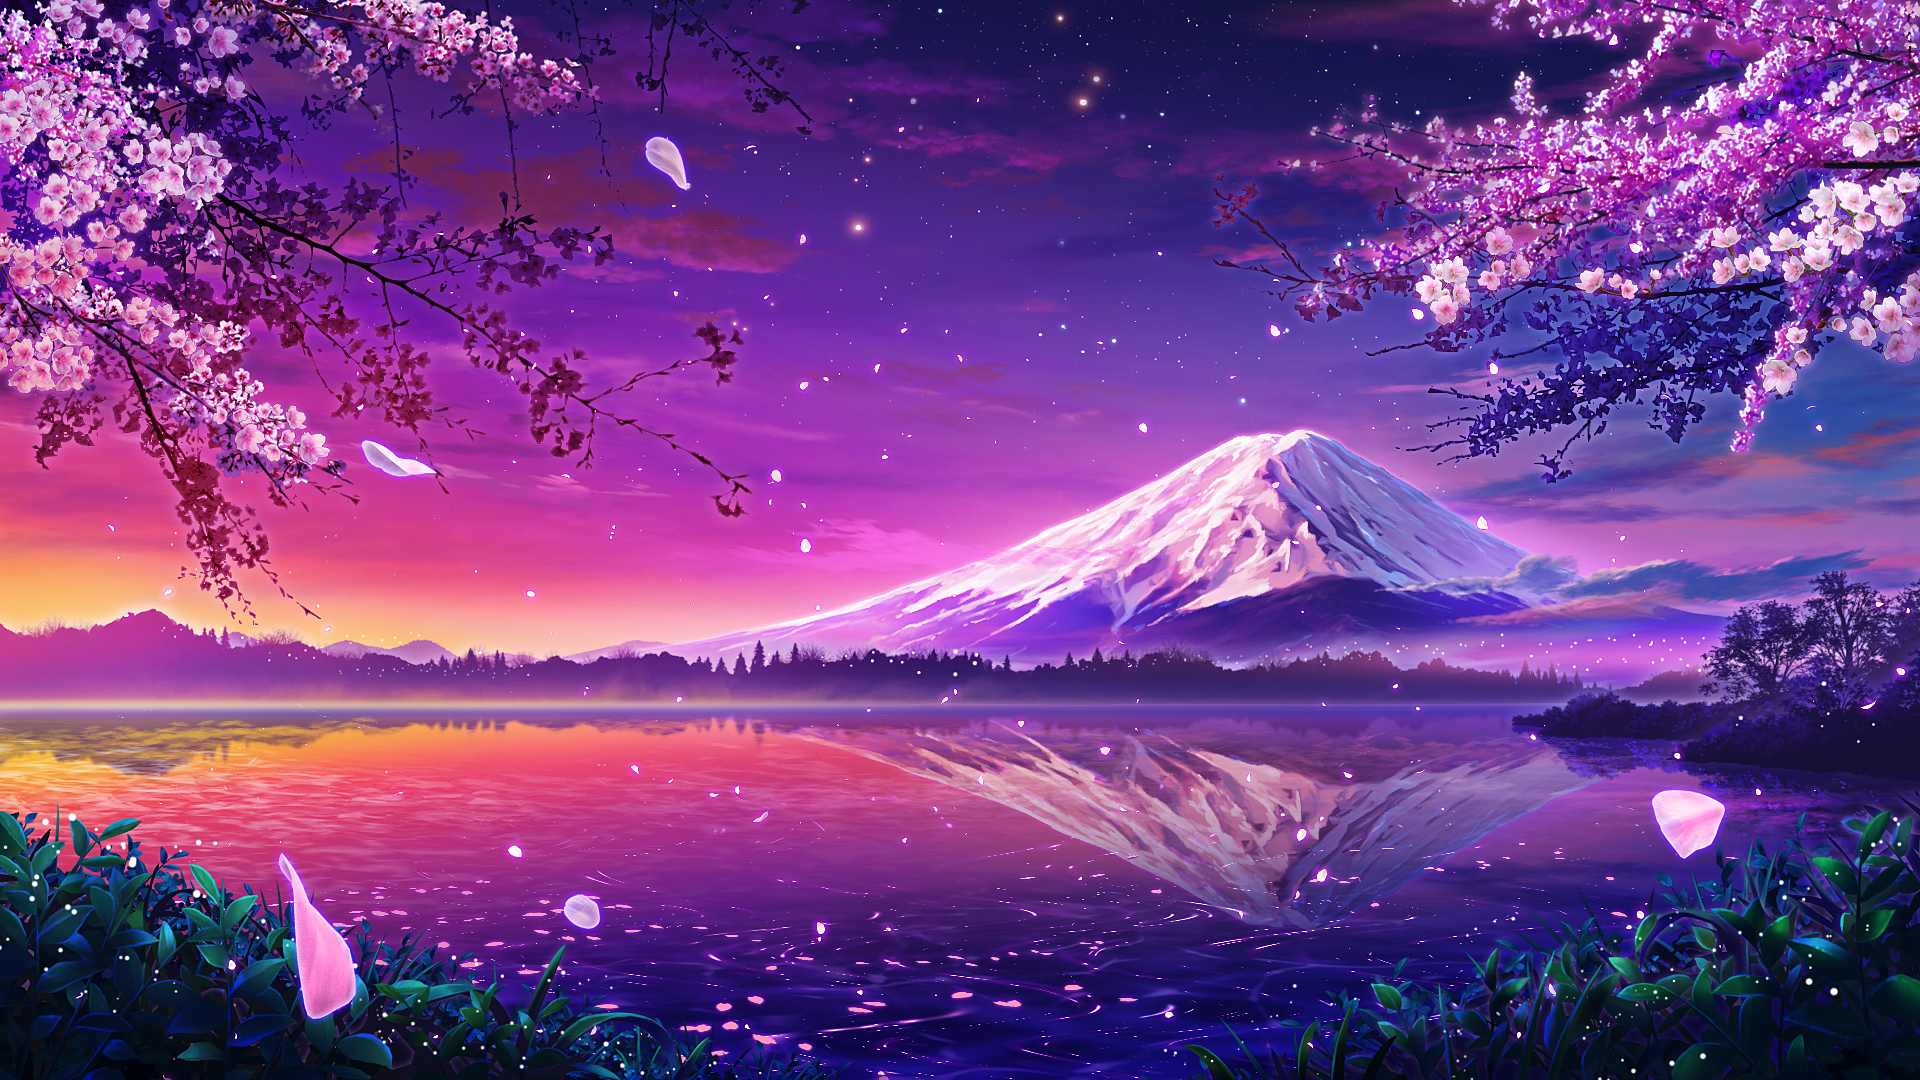 Anime Pixiv Cherry Blossom Petals Reflection Water Sunset Mountains Snow Nature Sunset Glow Sky 1920x1080